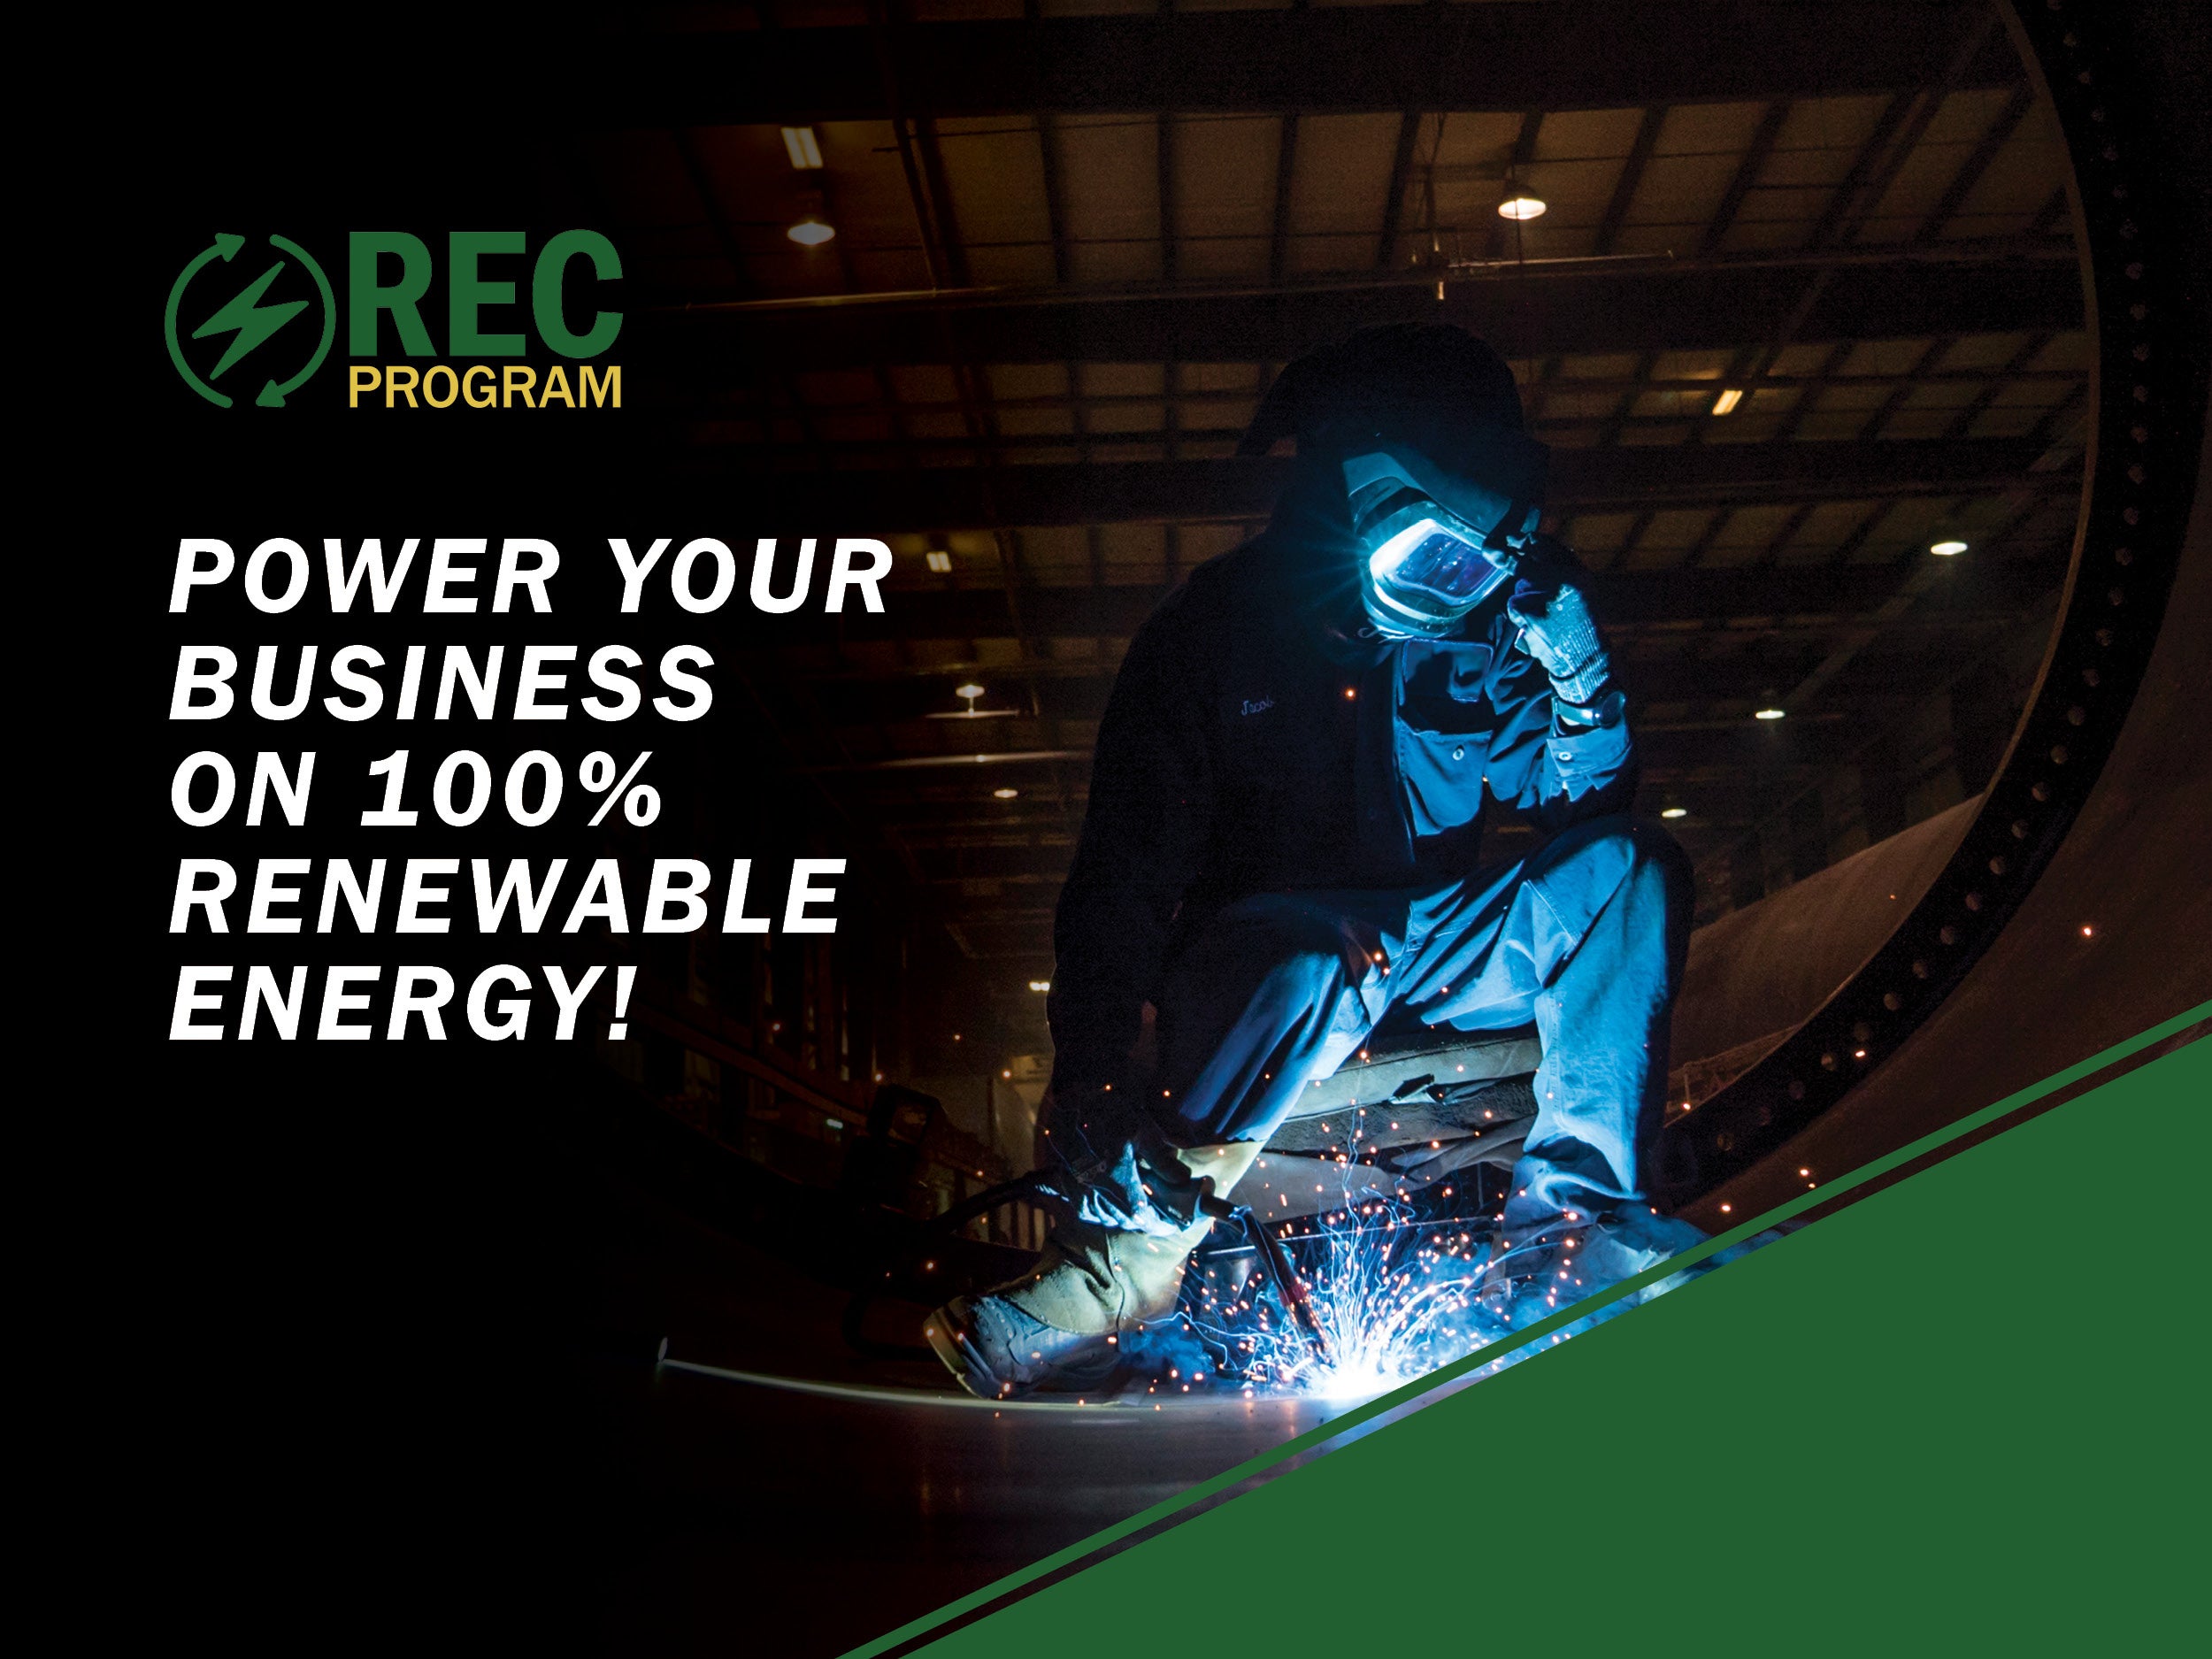 Power your business on 100% Renewable Energy!